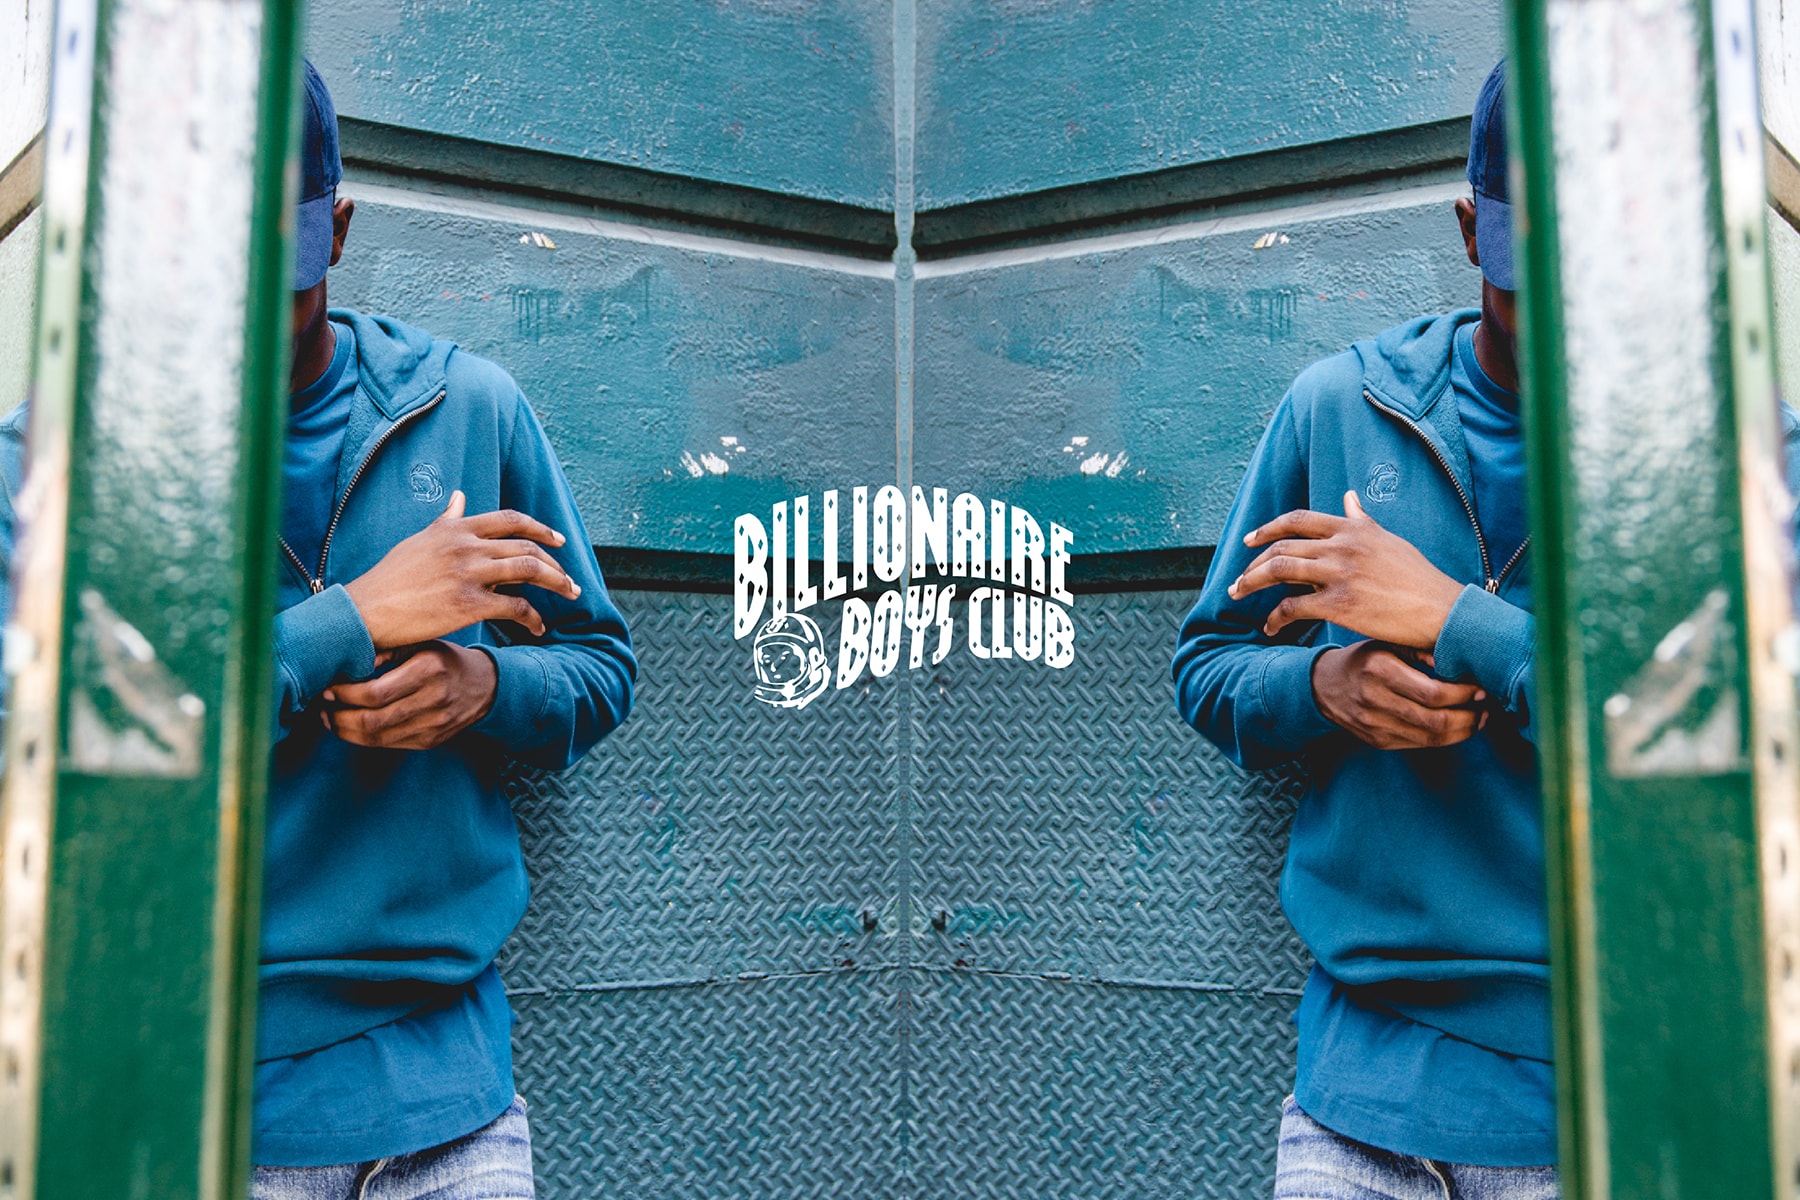 billionaire boys club fall 2016 exclusive capsule collection red black blue green sweatpants zip-up hoodies